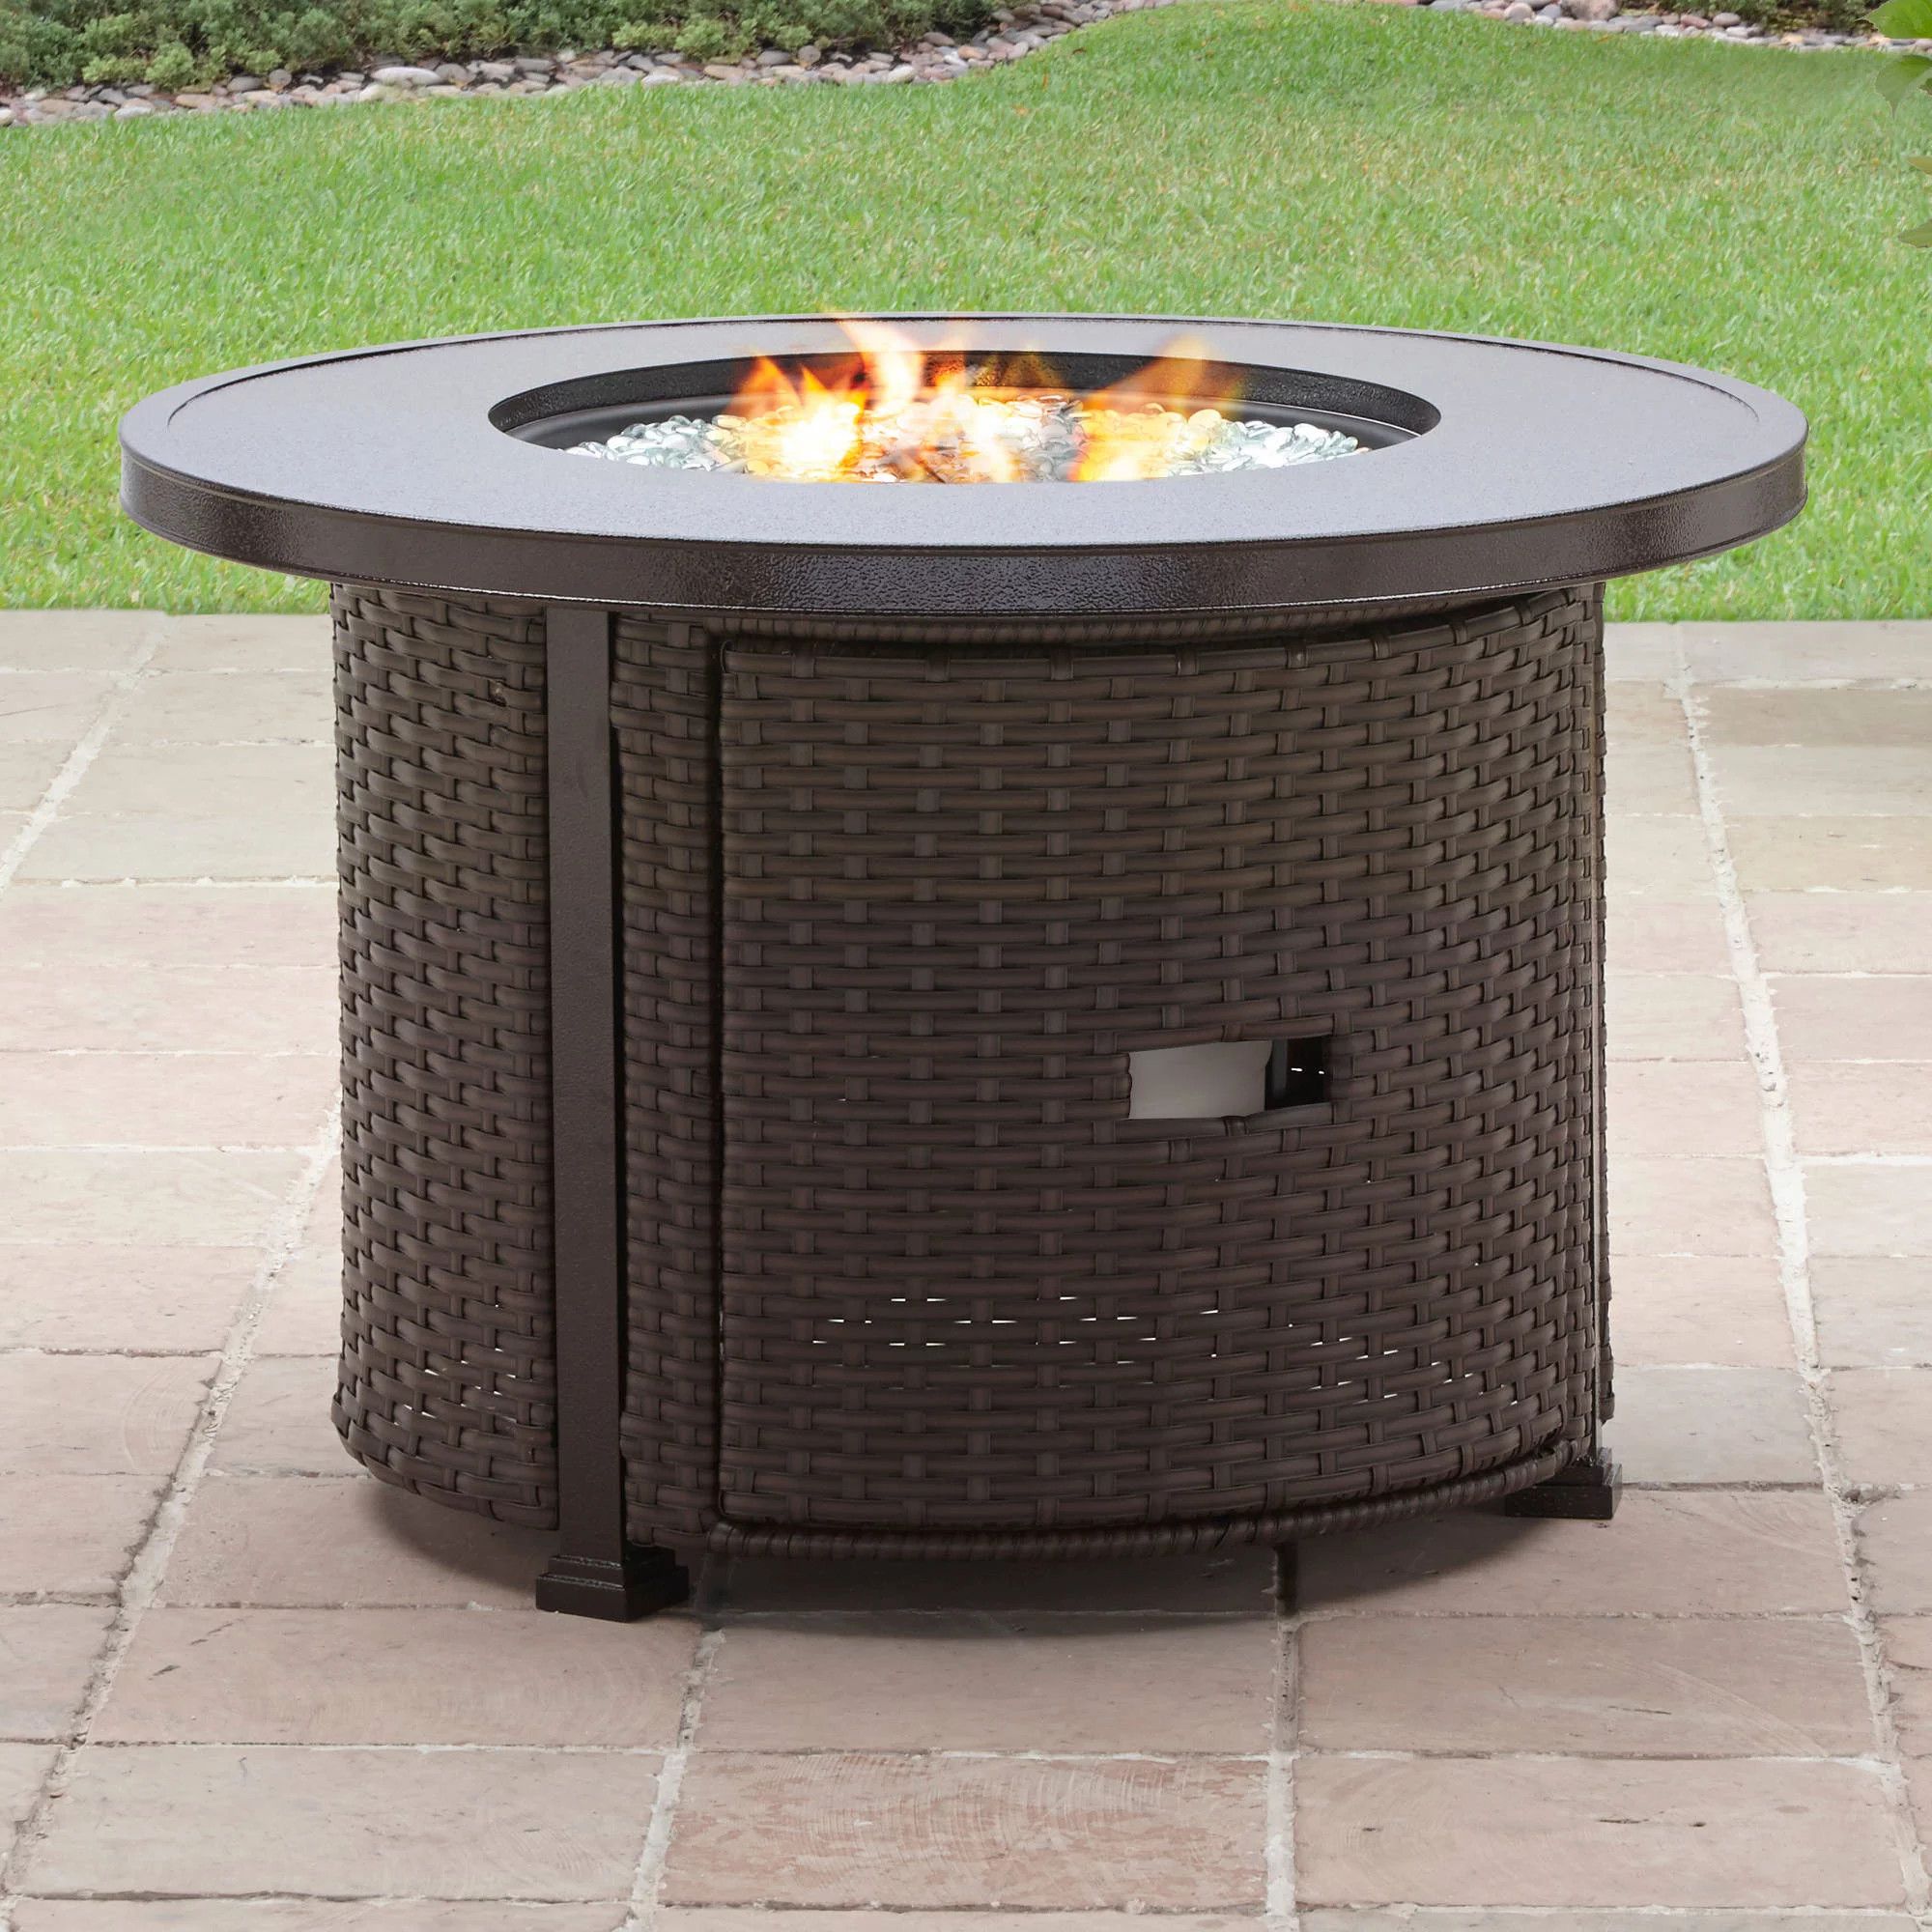 Better Homes & Gardens Colebrooke 37" Round 50,000 BTU Propane Gas Fire Pit Table with Glass Bead... | Walmart (US)